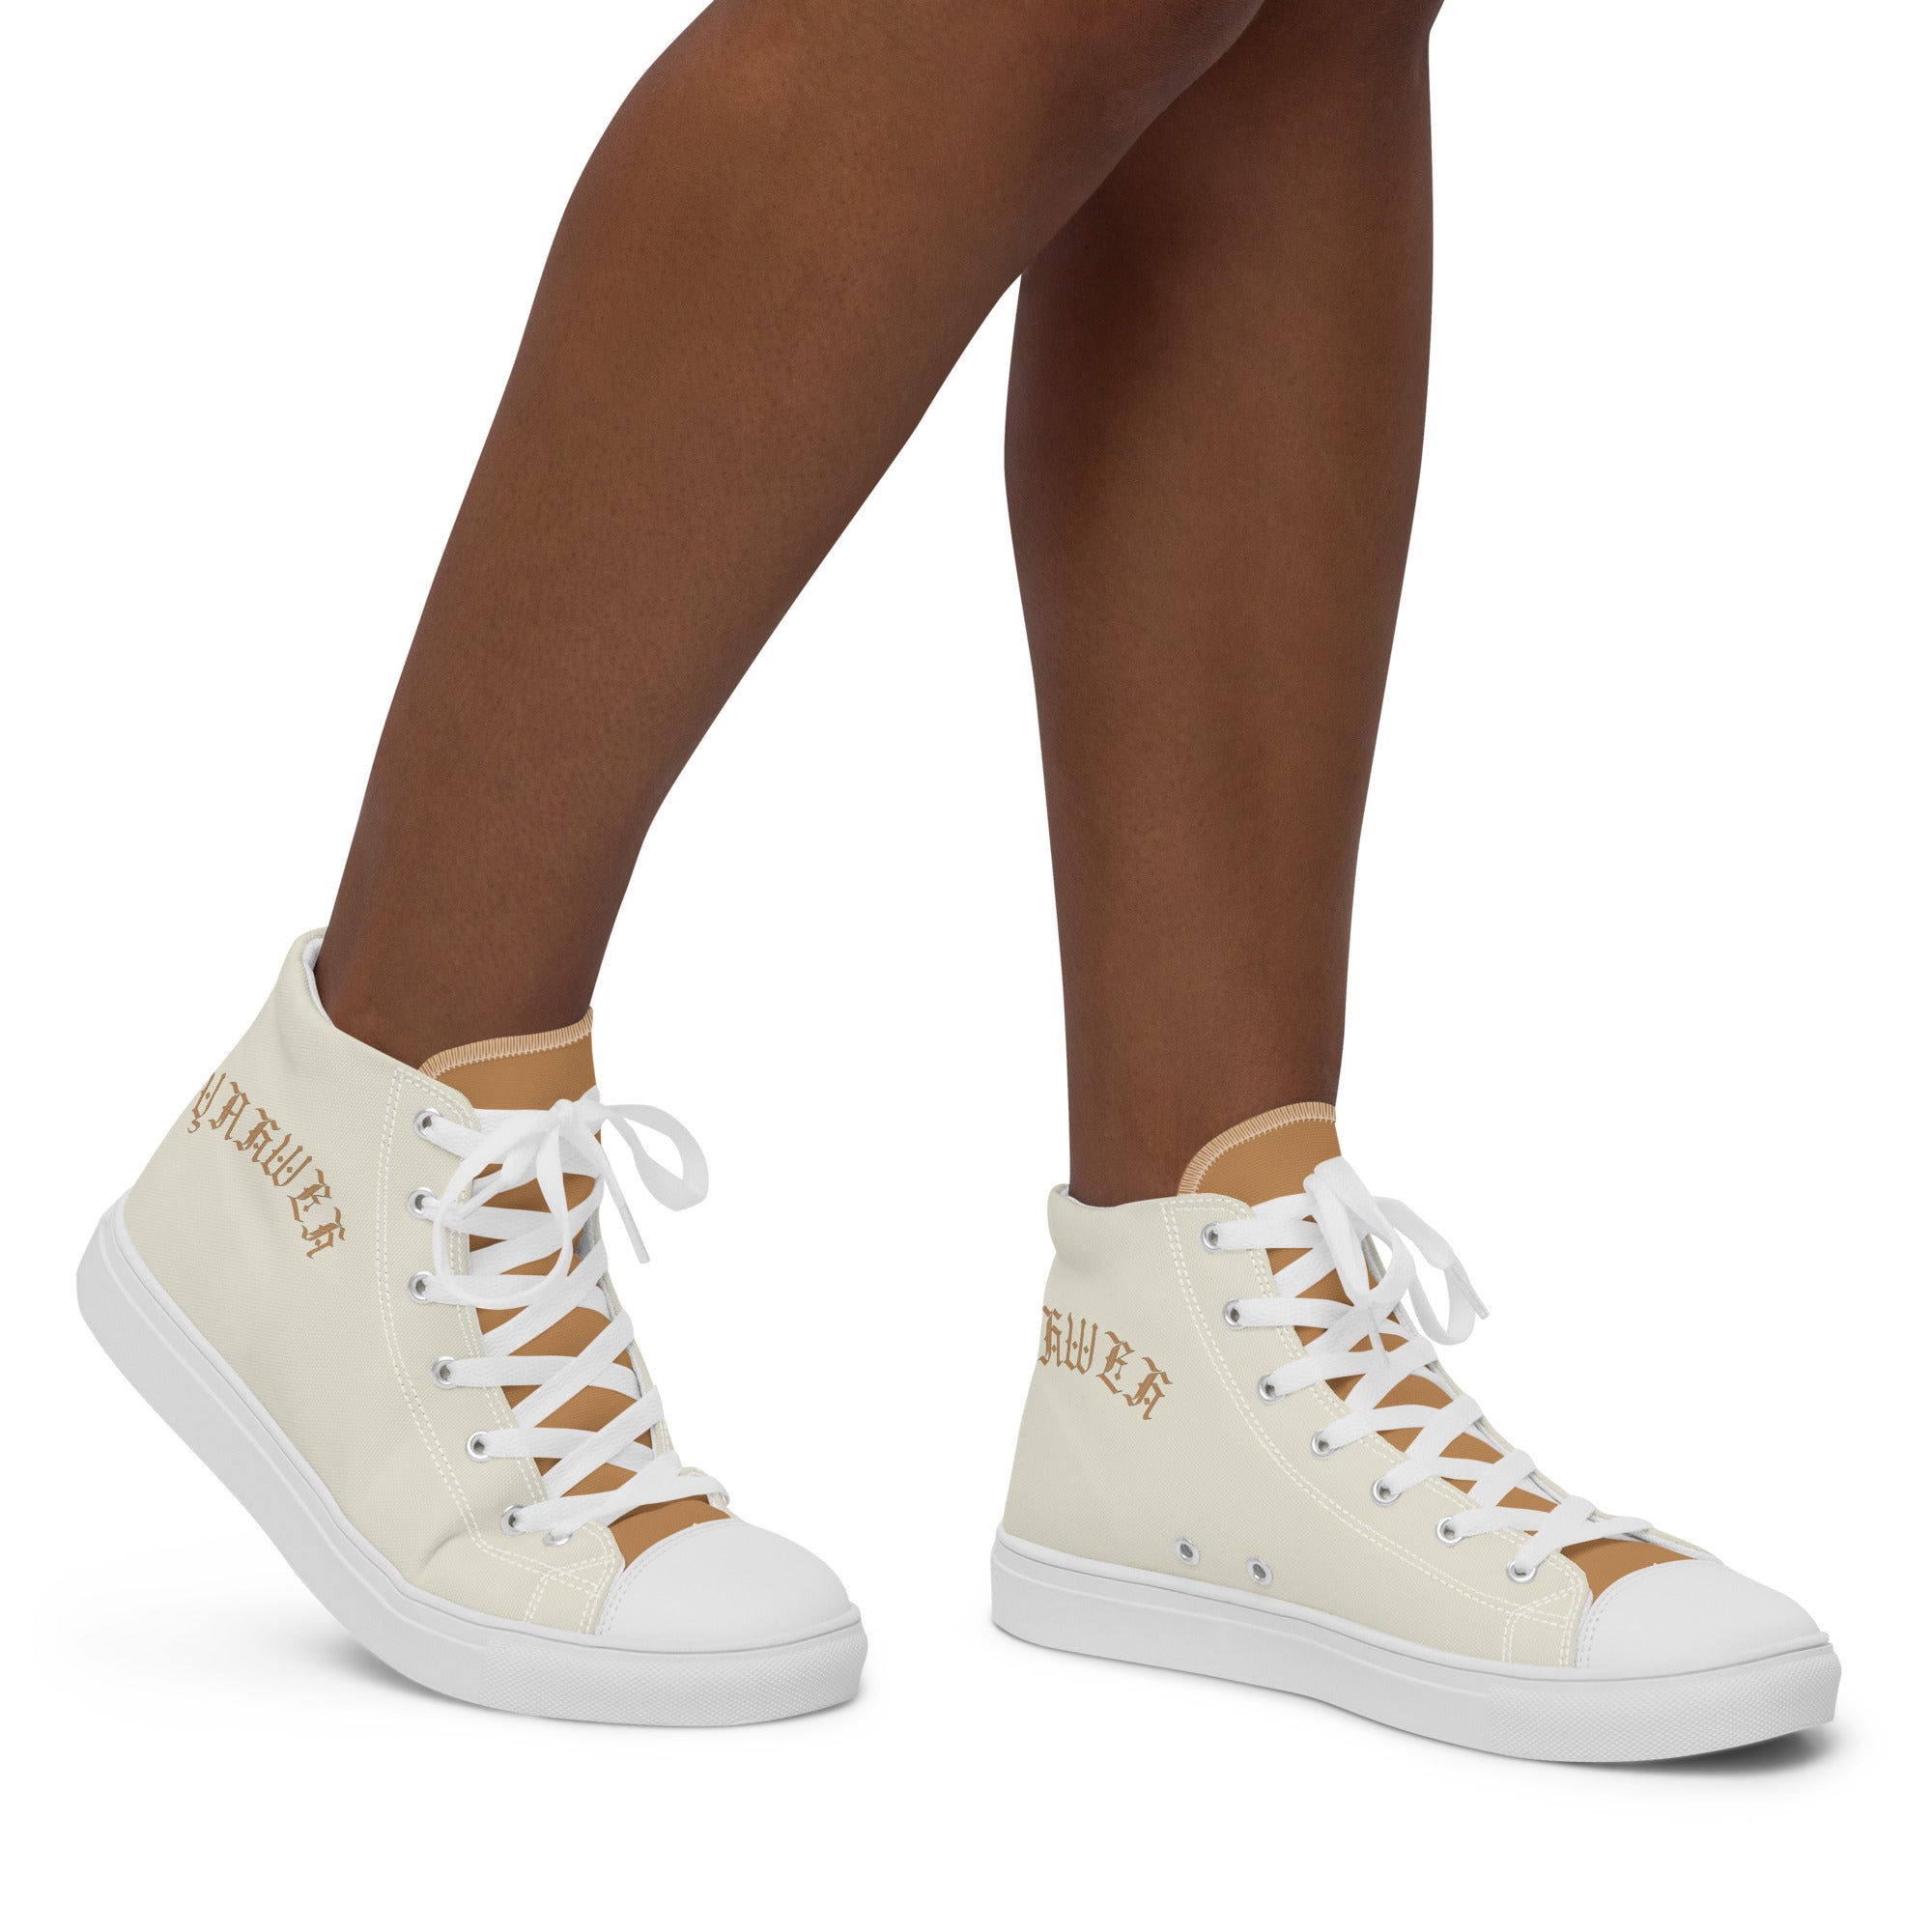 Yahweh Cream and Gold Women’s High Top Canvas Shoes Size: 5 Jesus Passion Apparel